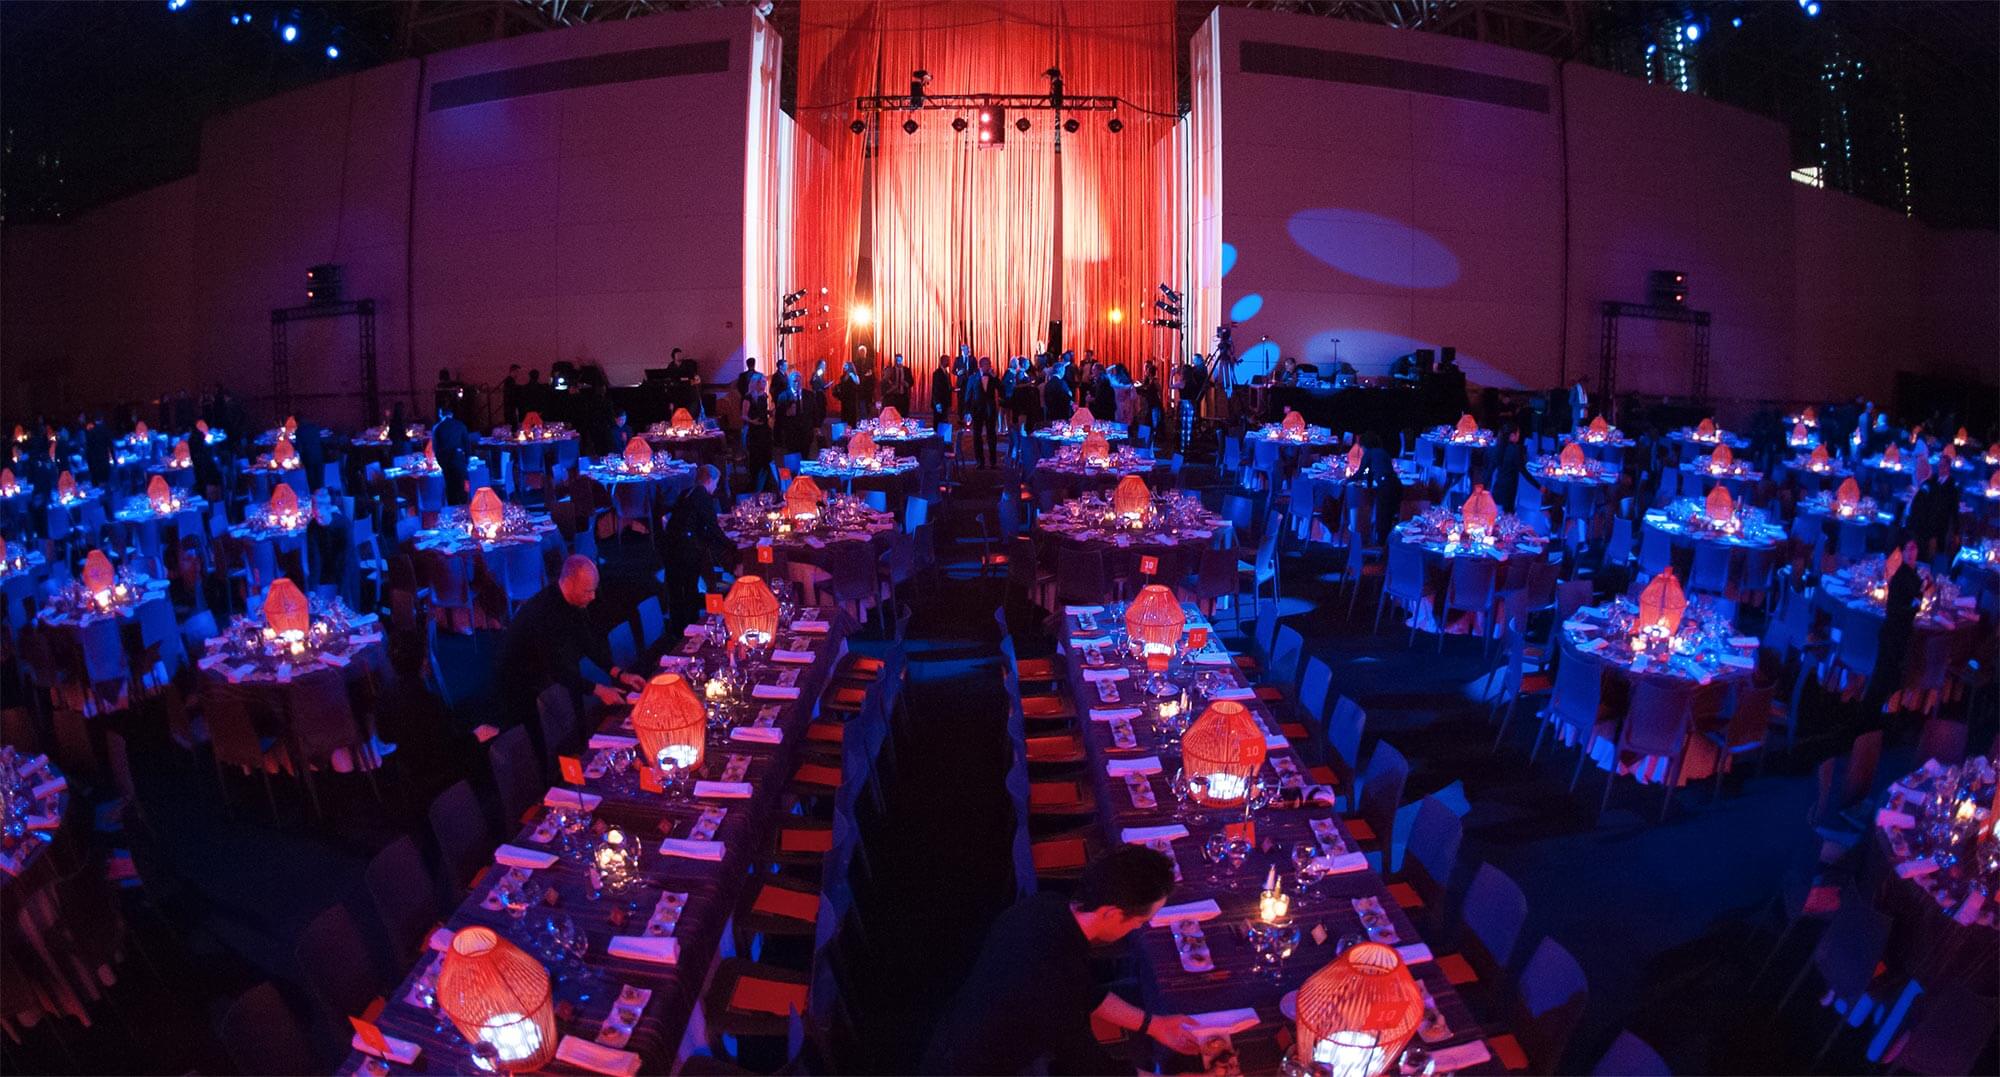 Panoramic view of Interior Design's Hall of Fame banquet hall.